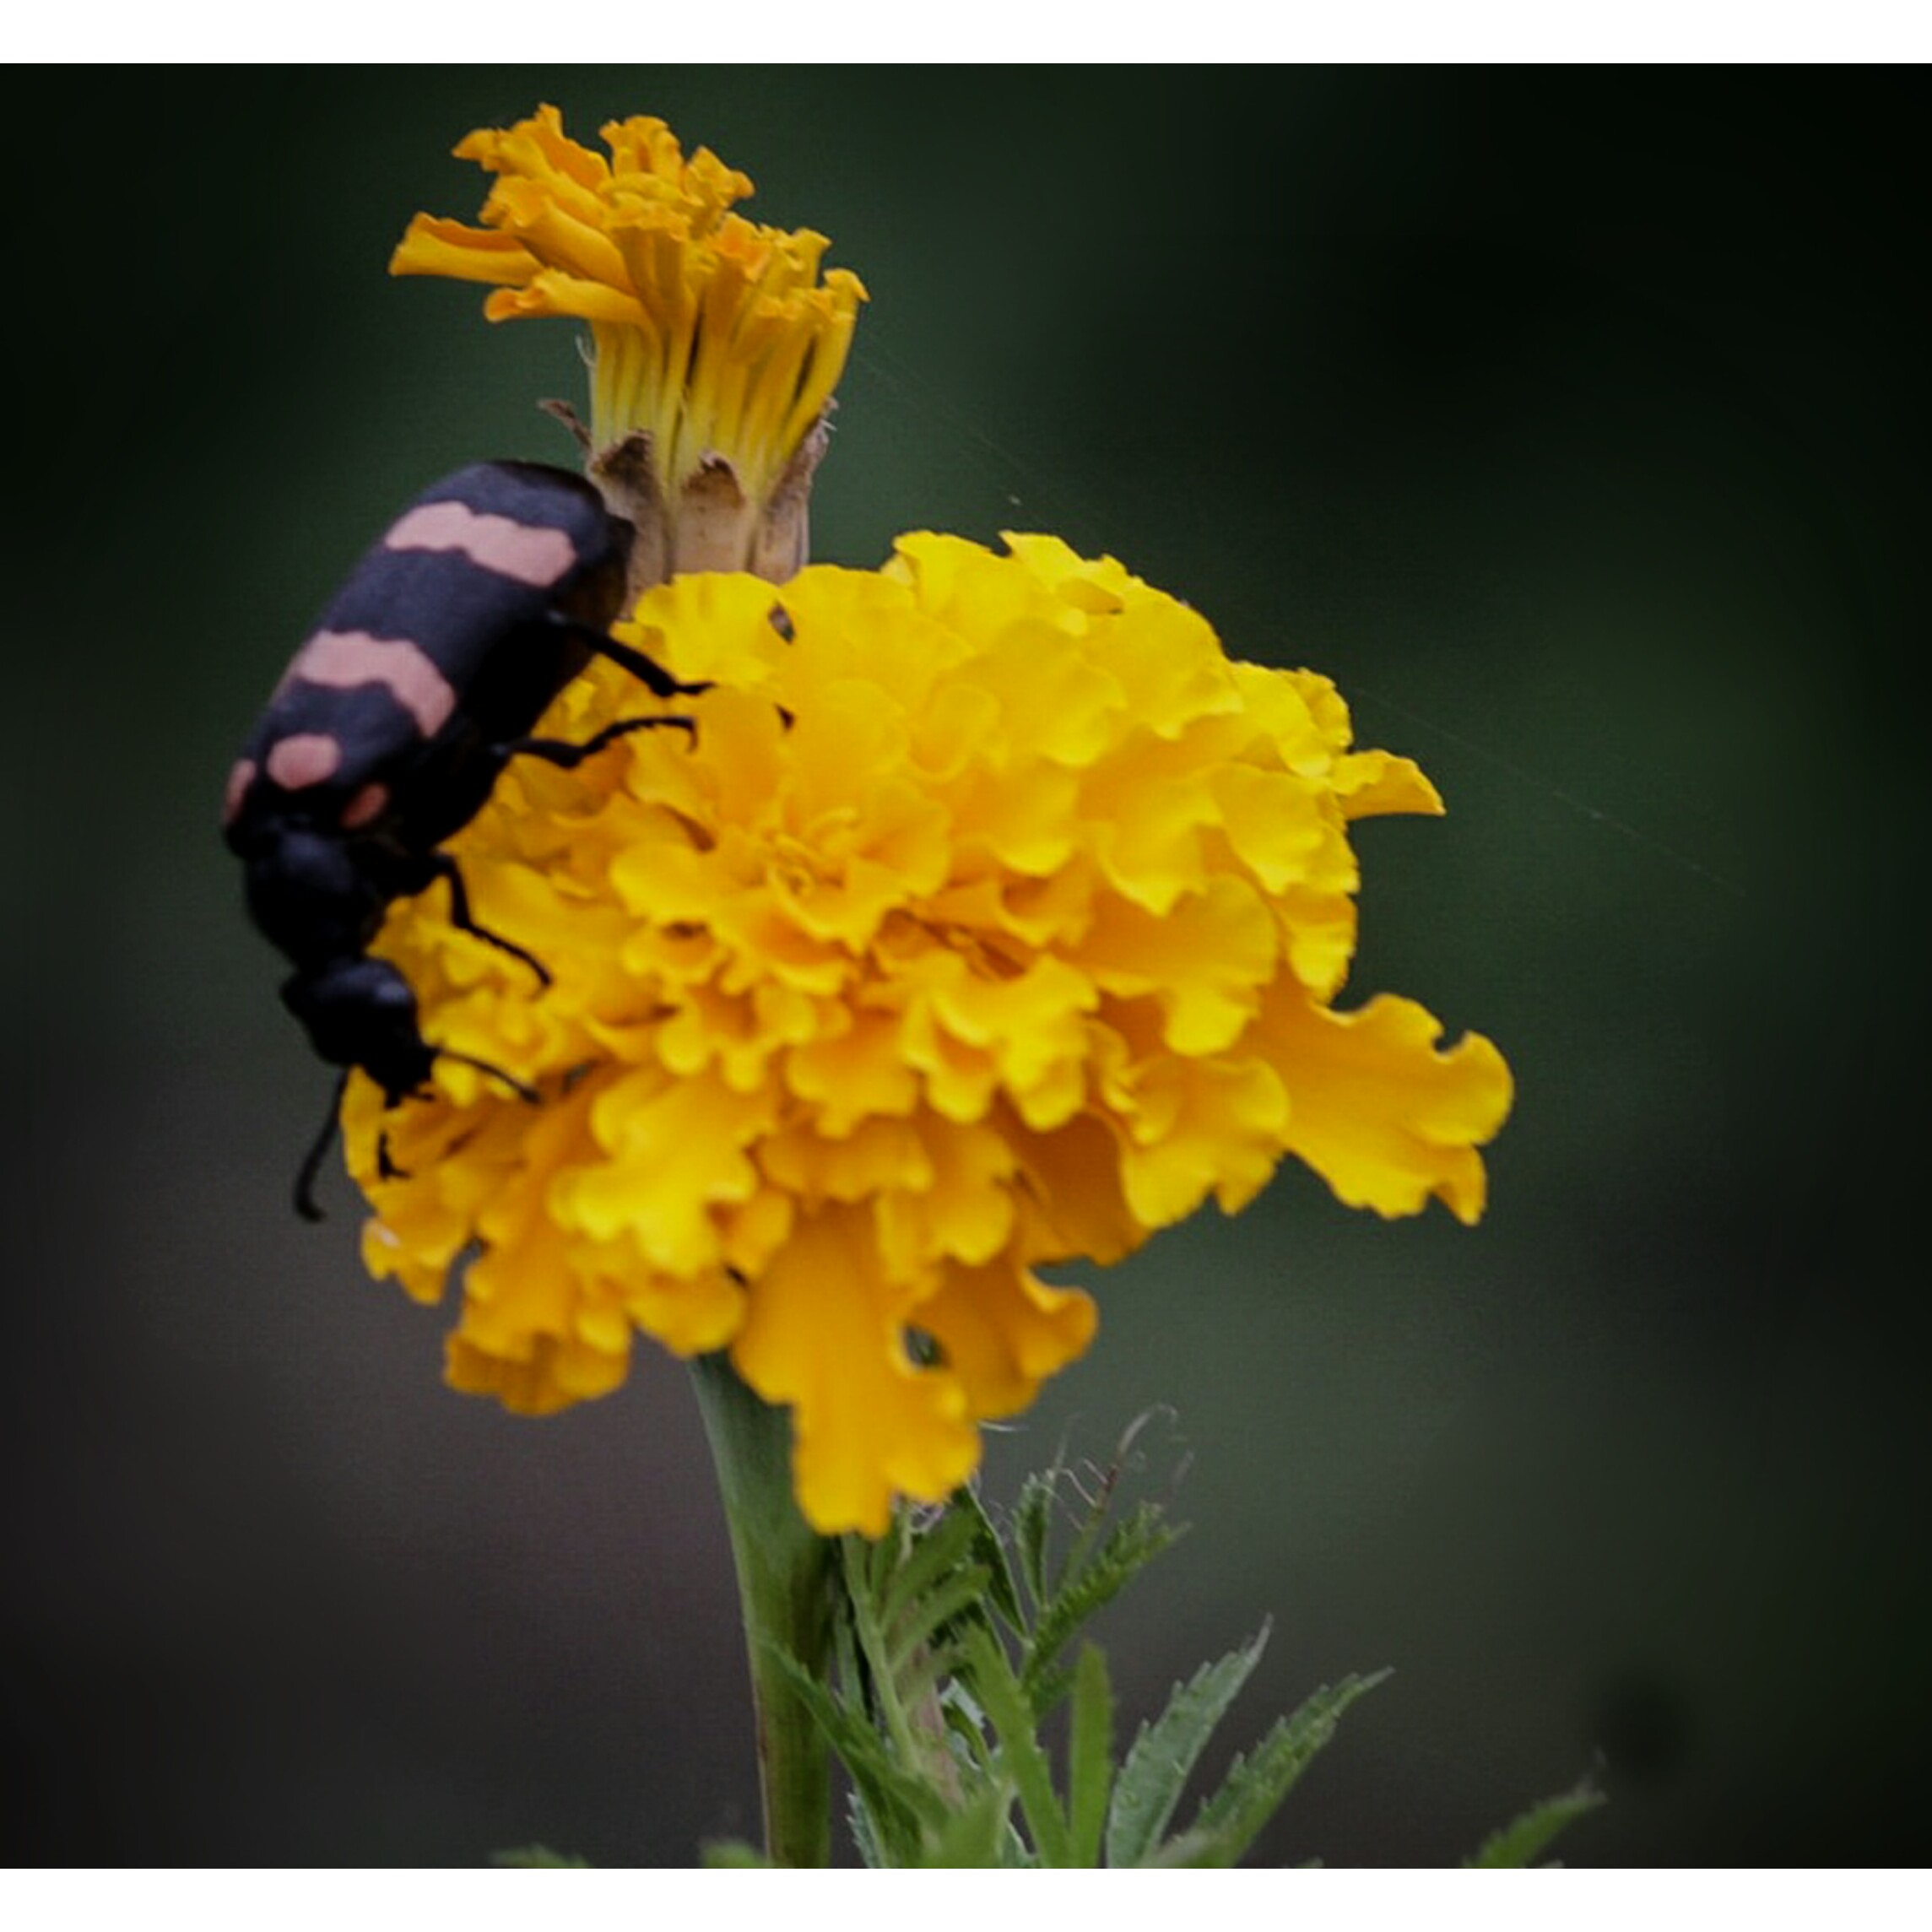 Insect on a marigold flower